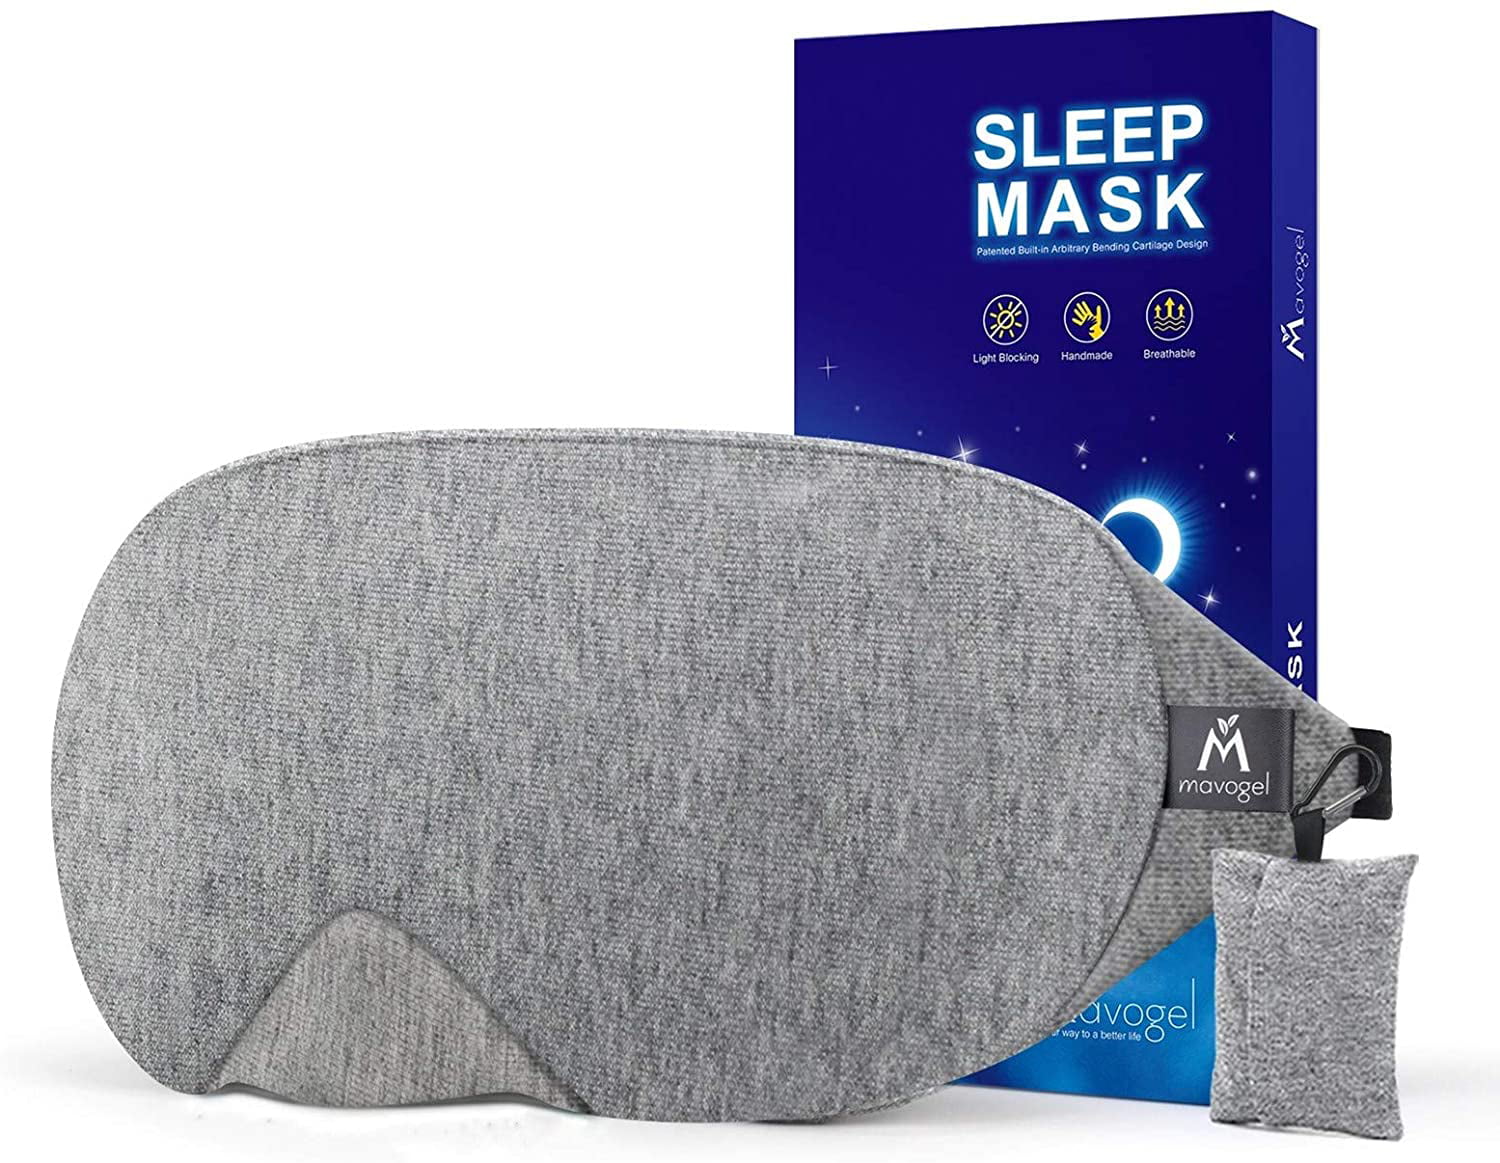  Mavogel Weighted Eye Mask for Sleeping - Weighted Sleep Mask  with Removable Eye Pillow, Cooling Eye Mask for Men Women Black : Health &  Household